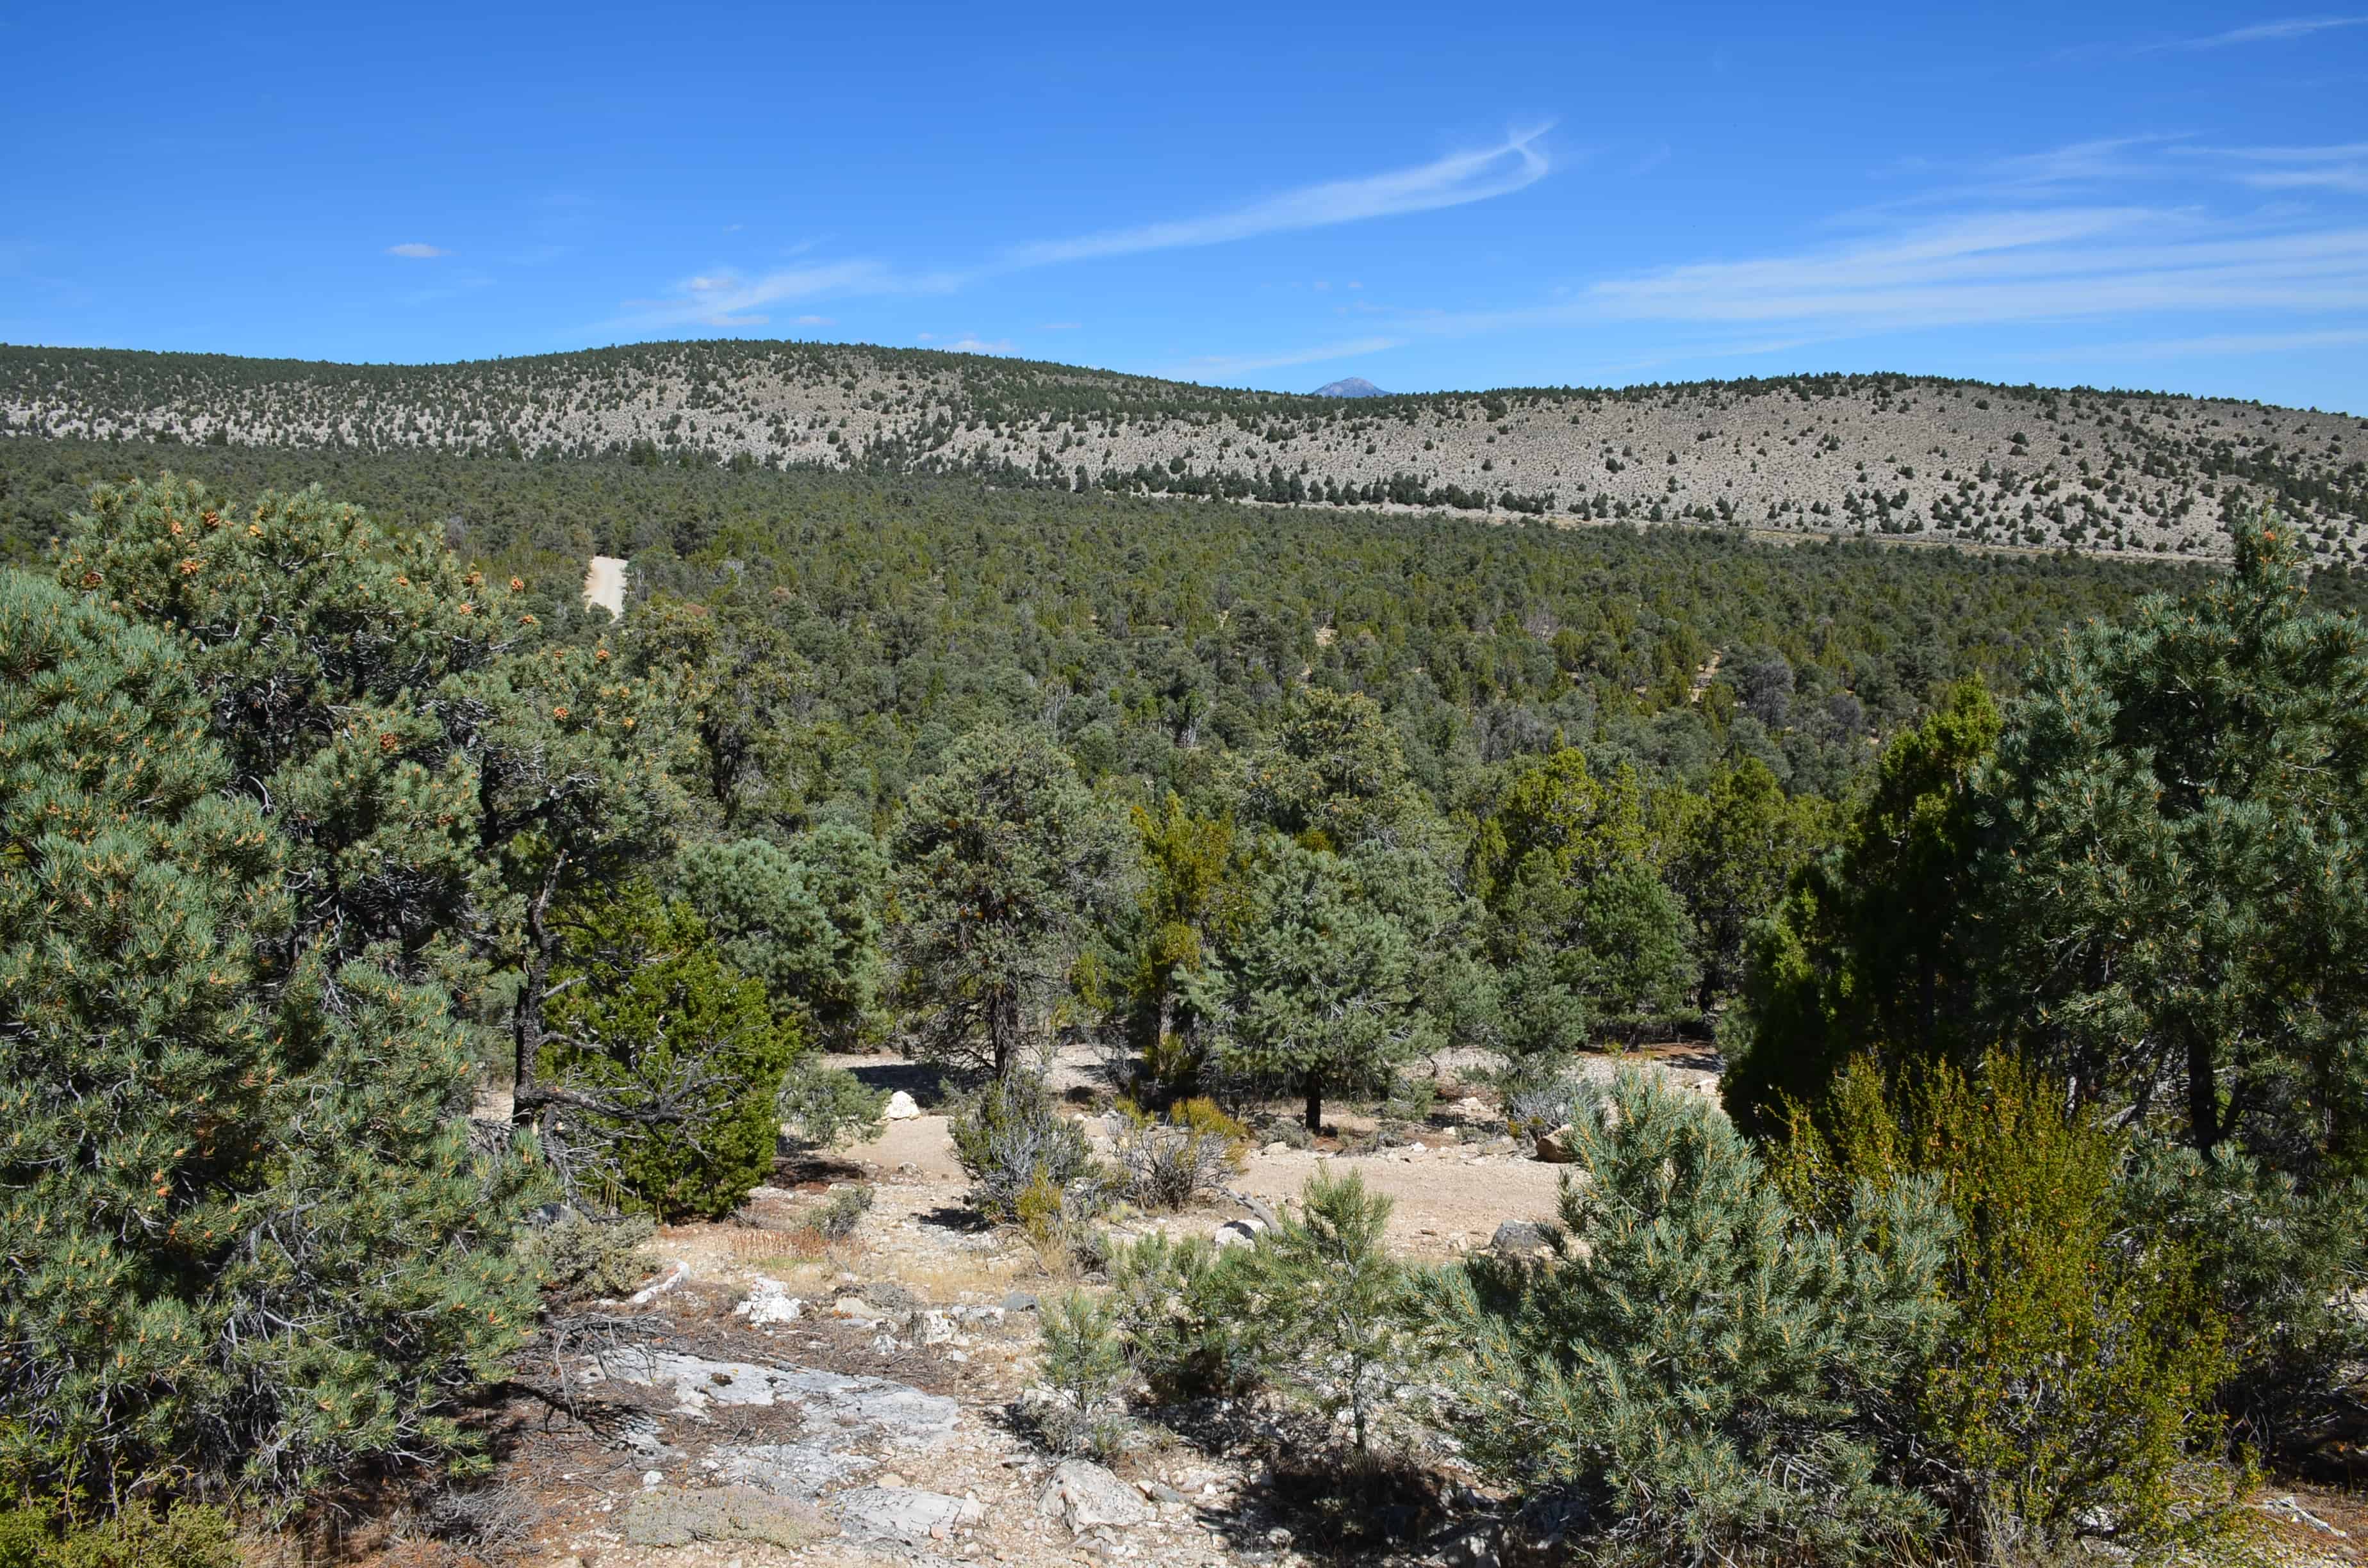 Mountain View Nature Trail at Great Basin National Park, Nevada